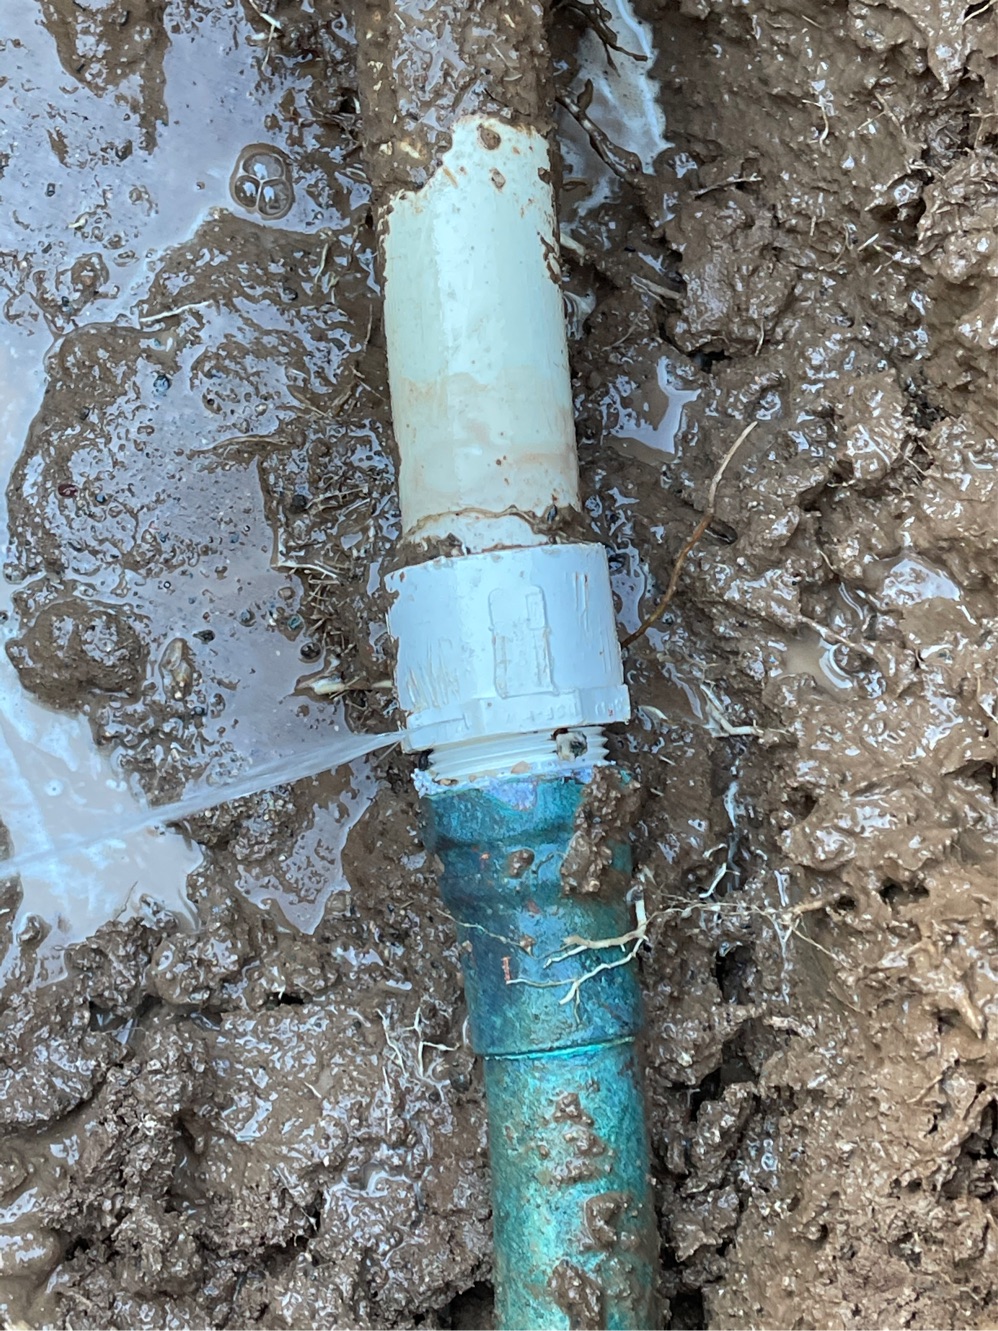 Main Water Service Replacement